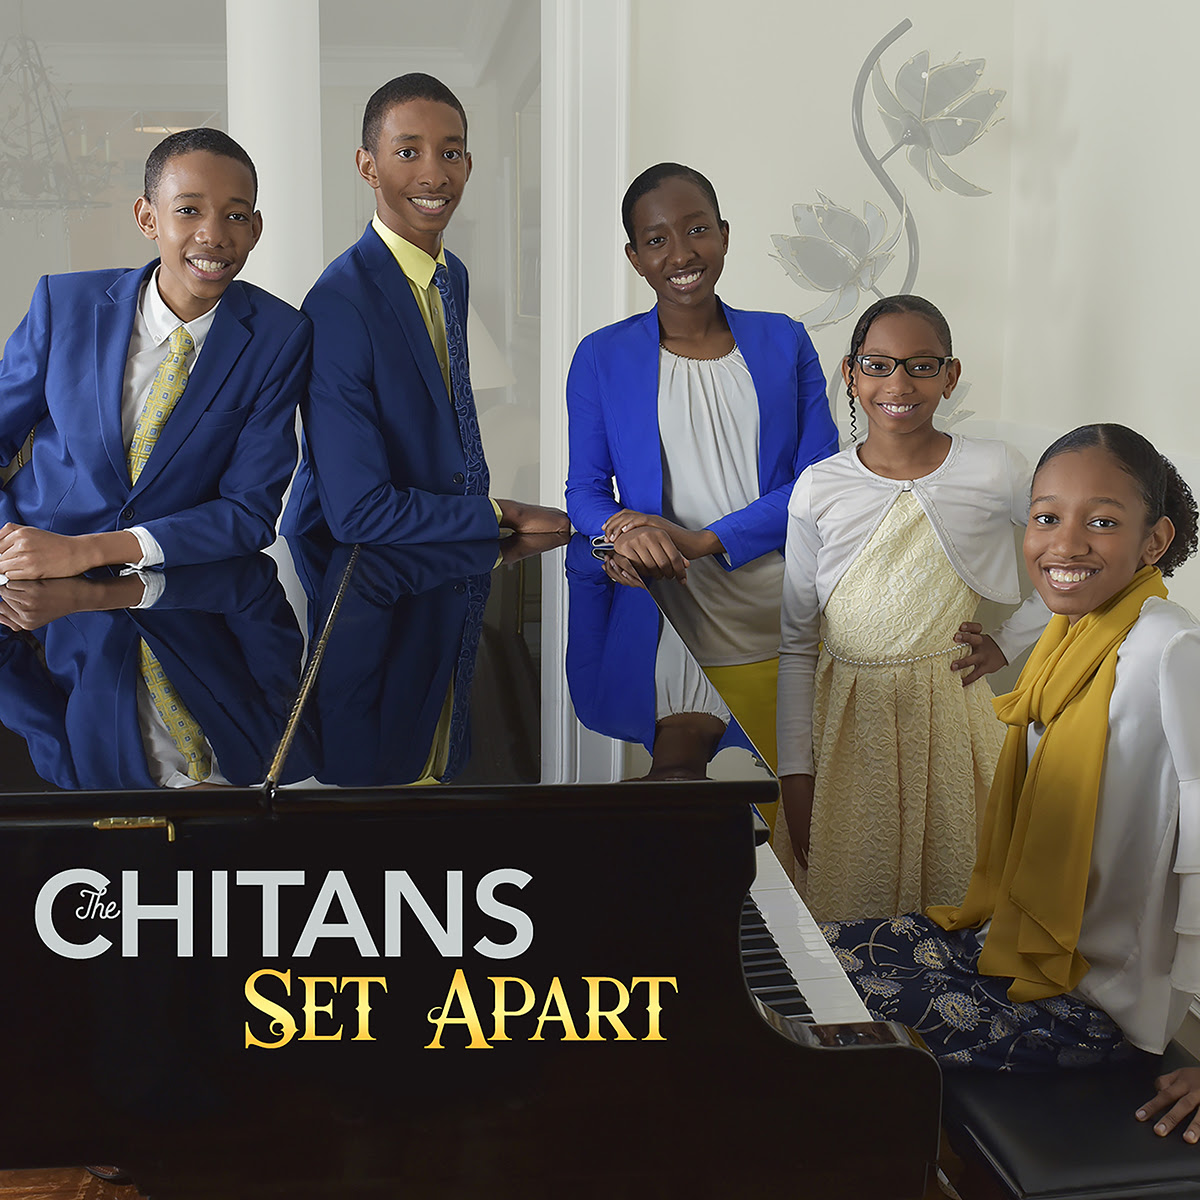 The Chitans to release debut album with Horizon Records